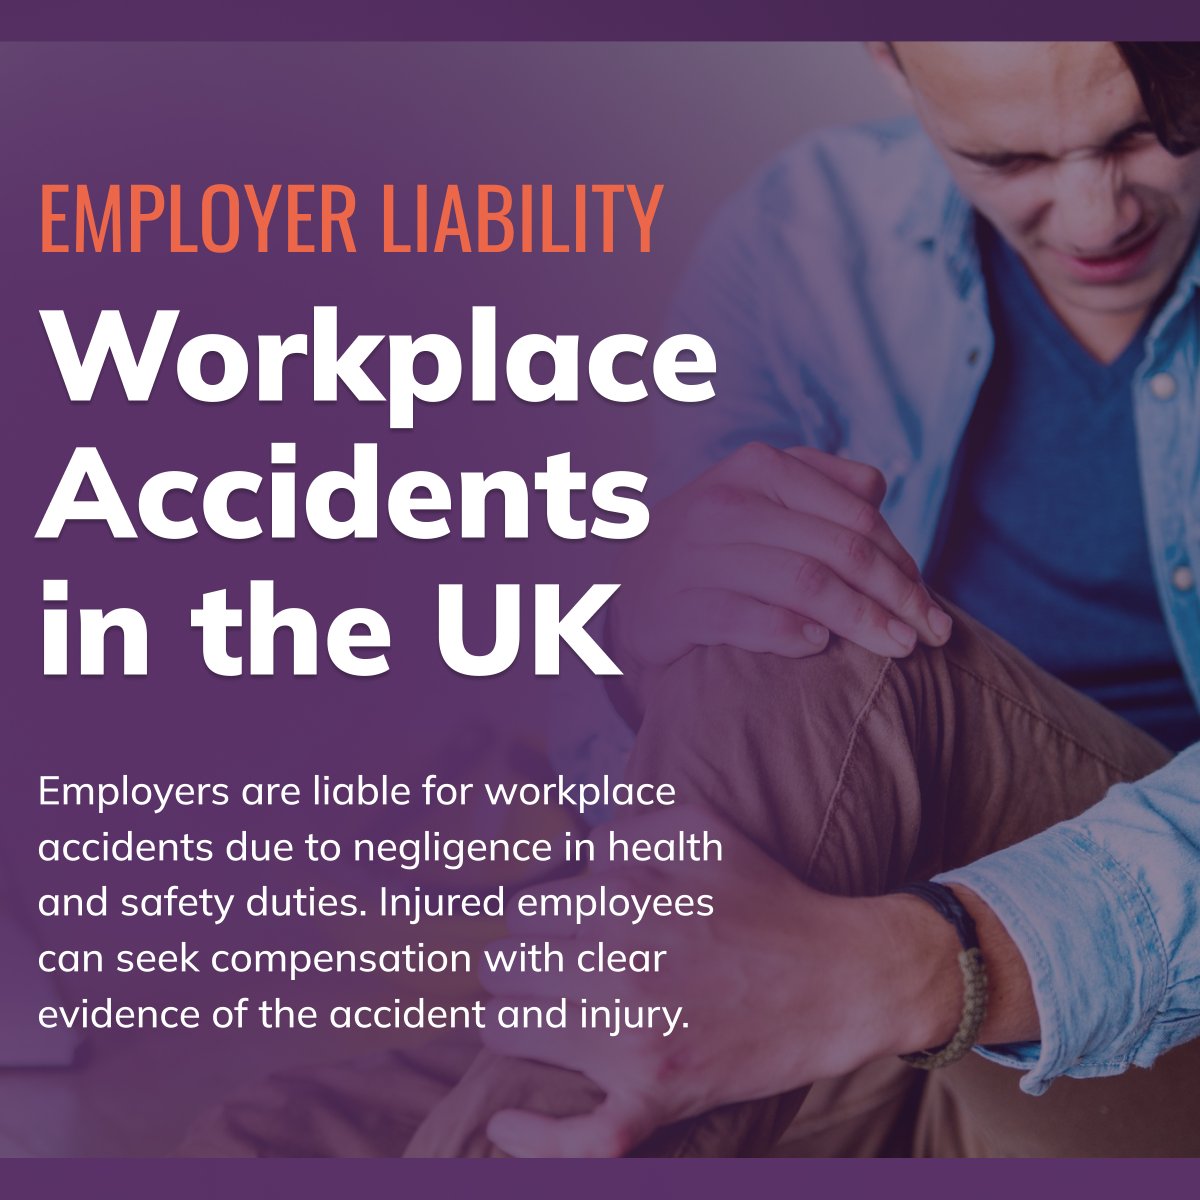 Understand employer responsibilities and liability in workplace accidents in the UK. Know your rights, seek justice! #EmployerLiability #WorkplaceAccidents #UKLaw #LegalRights #EmployeeSafety #OccupationalHazards #WorkplaceInjuries
Read more: claimtime.com